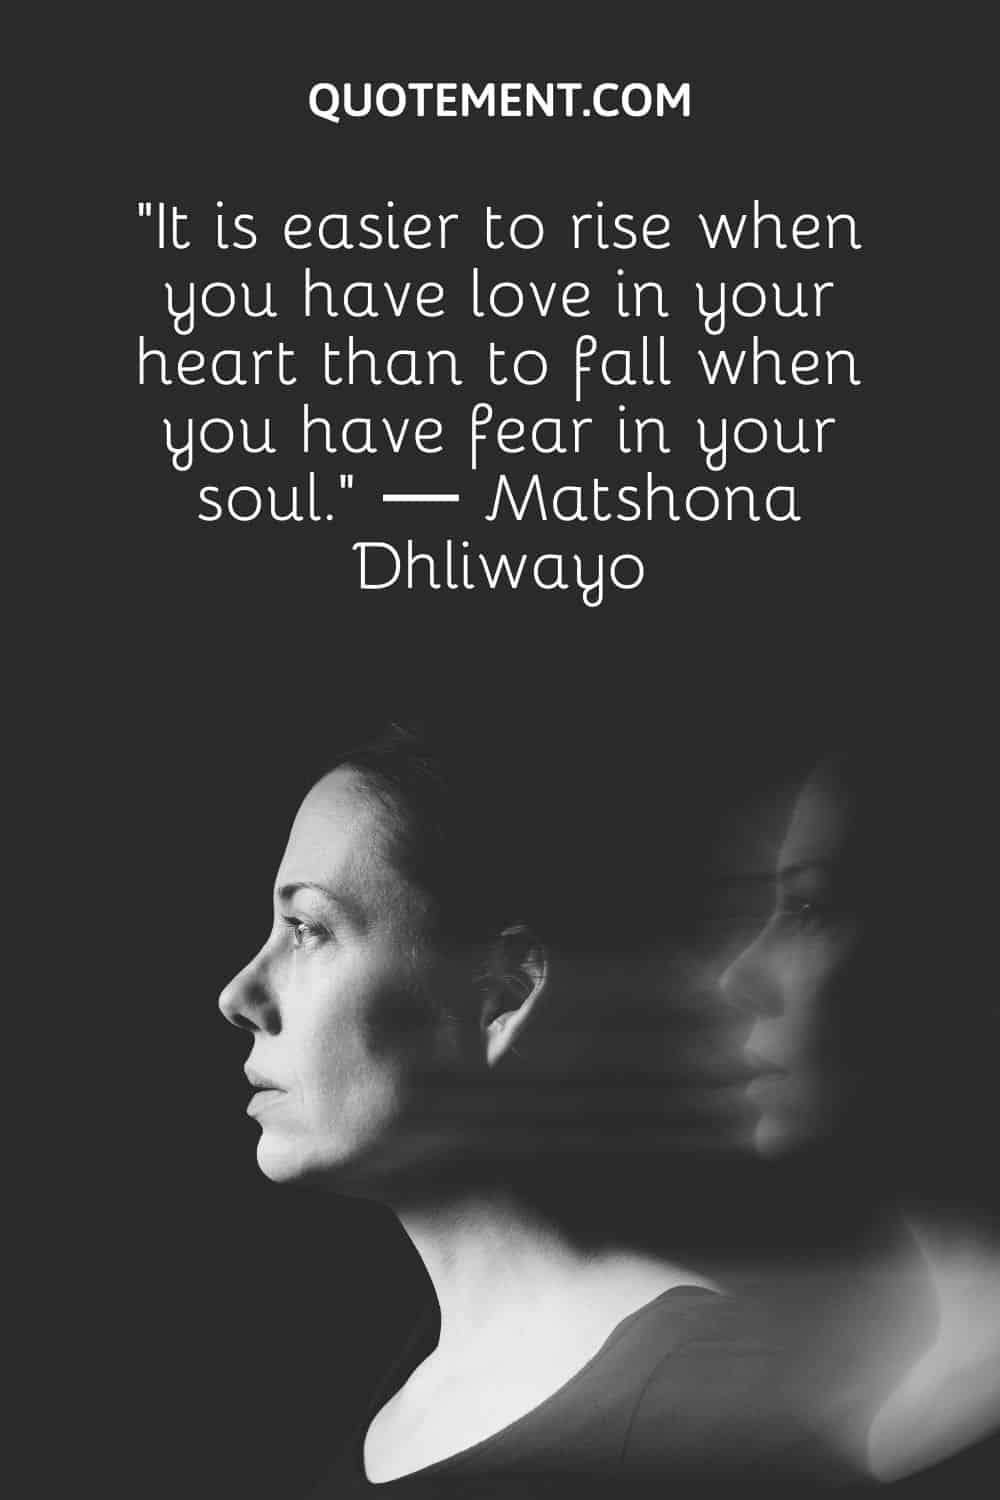 “It is easier to rise when you have love in your heart than to fall when you have fear in your soul.” ― Matshona Dhliwayo